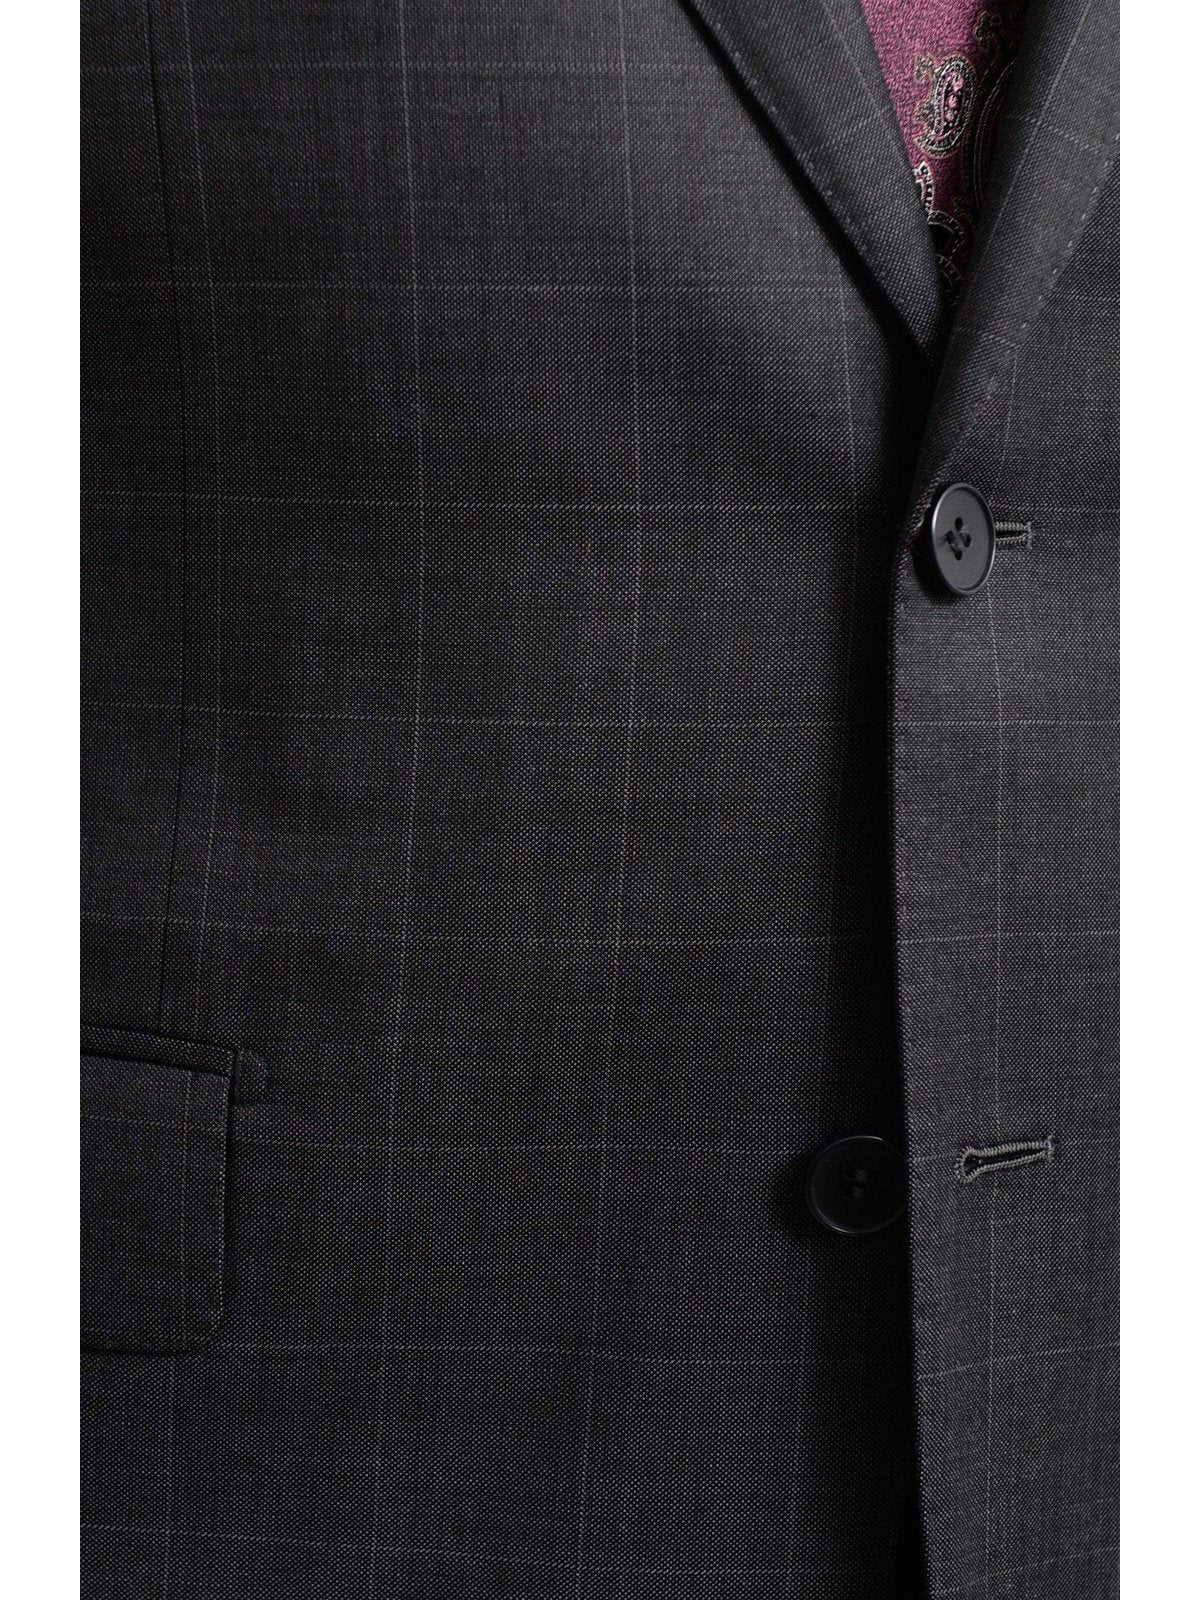 Napoli TWO PIECE SUITS Napoli Slim Fit Charcoal Gray Windowpane Two Button Half Canvassed Wool Suit